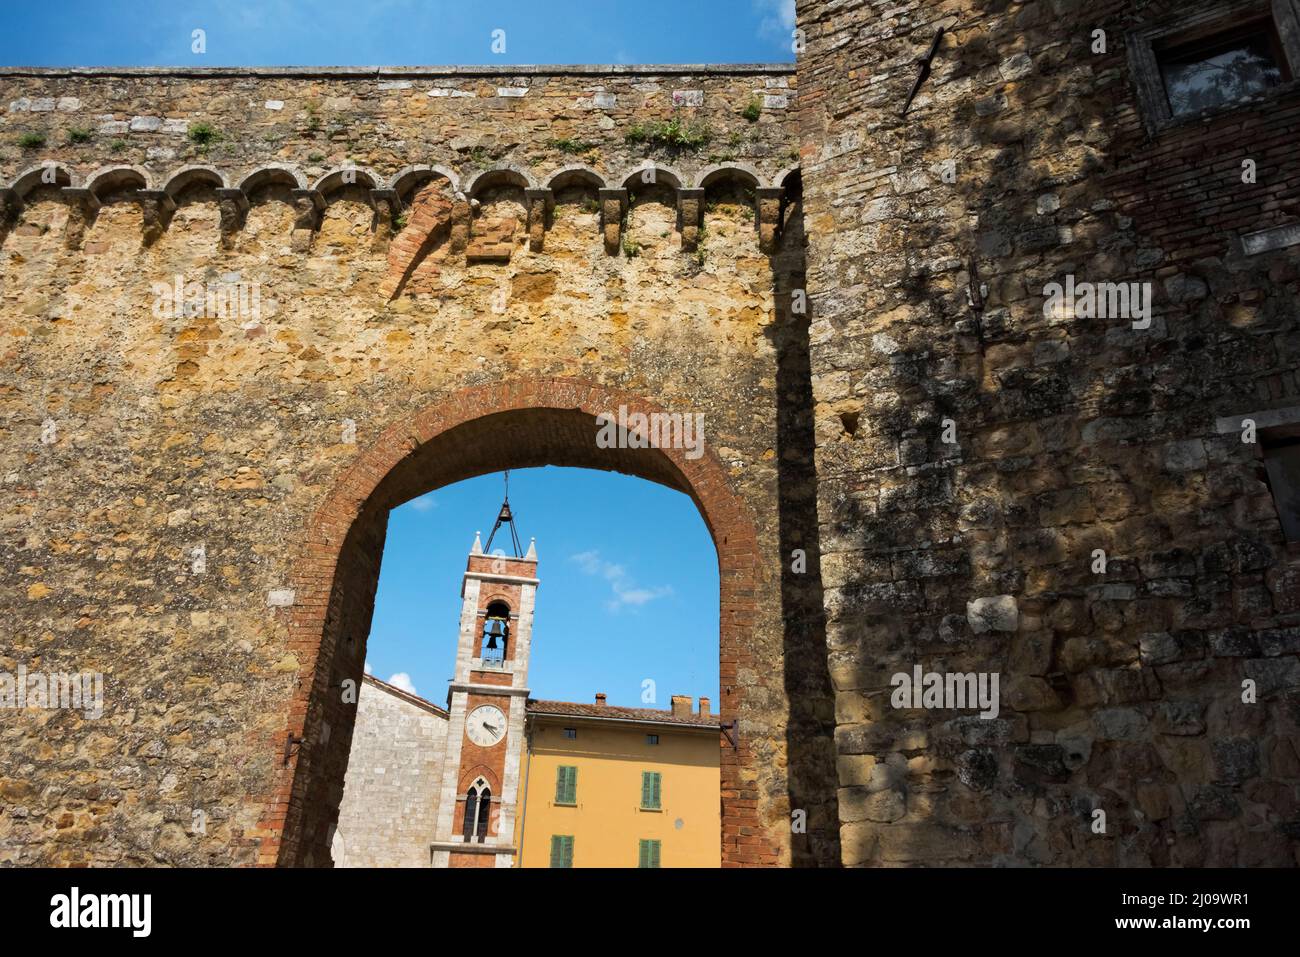 City walls of Historic town of San Quirico d'Orcia, Siena Province, Tuscany Region, Italy Stock Photo